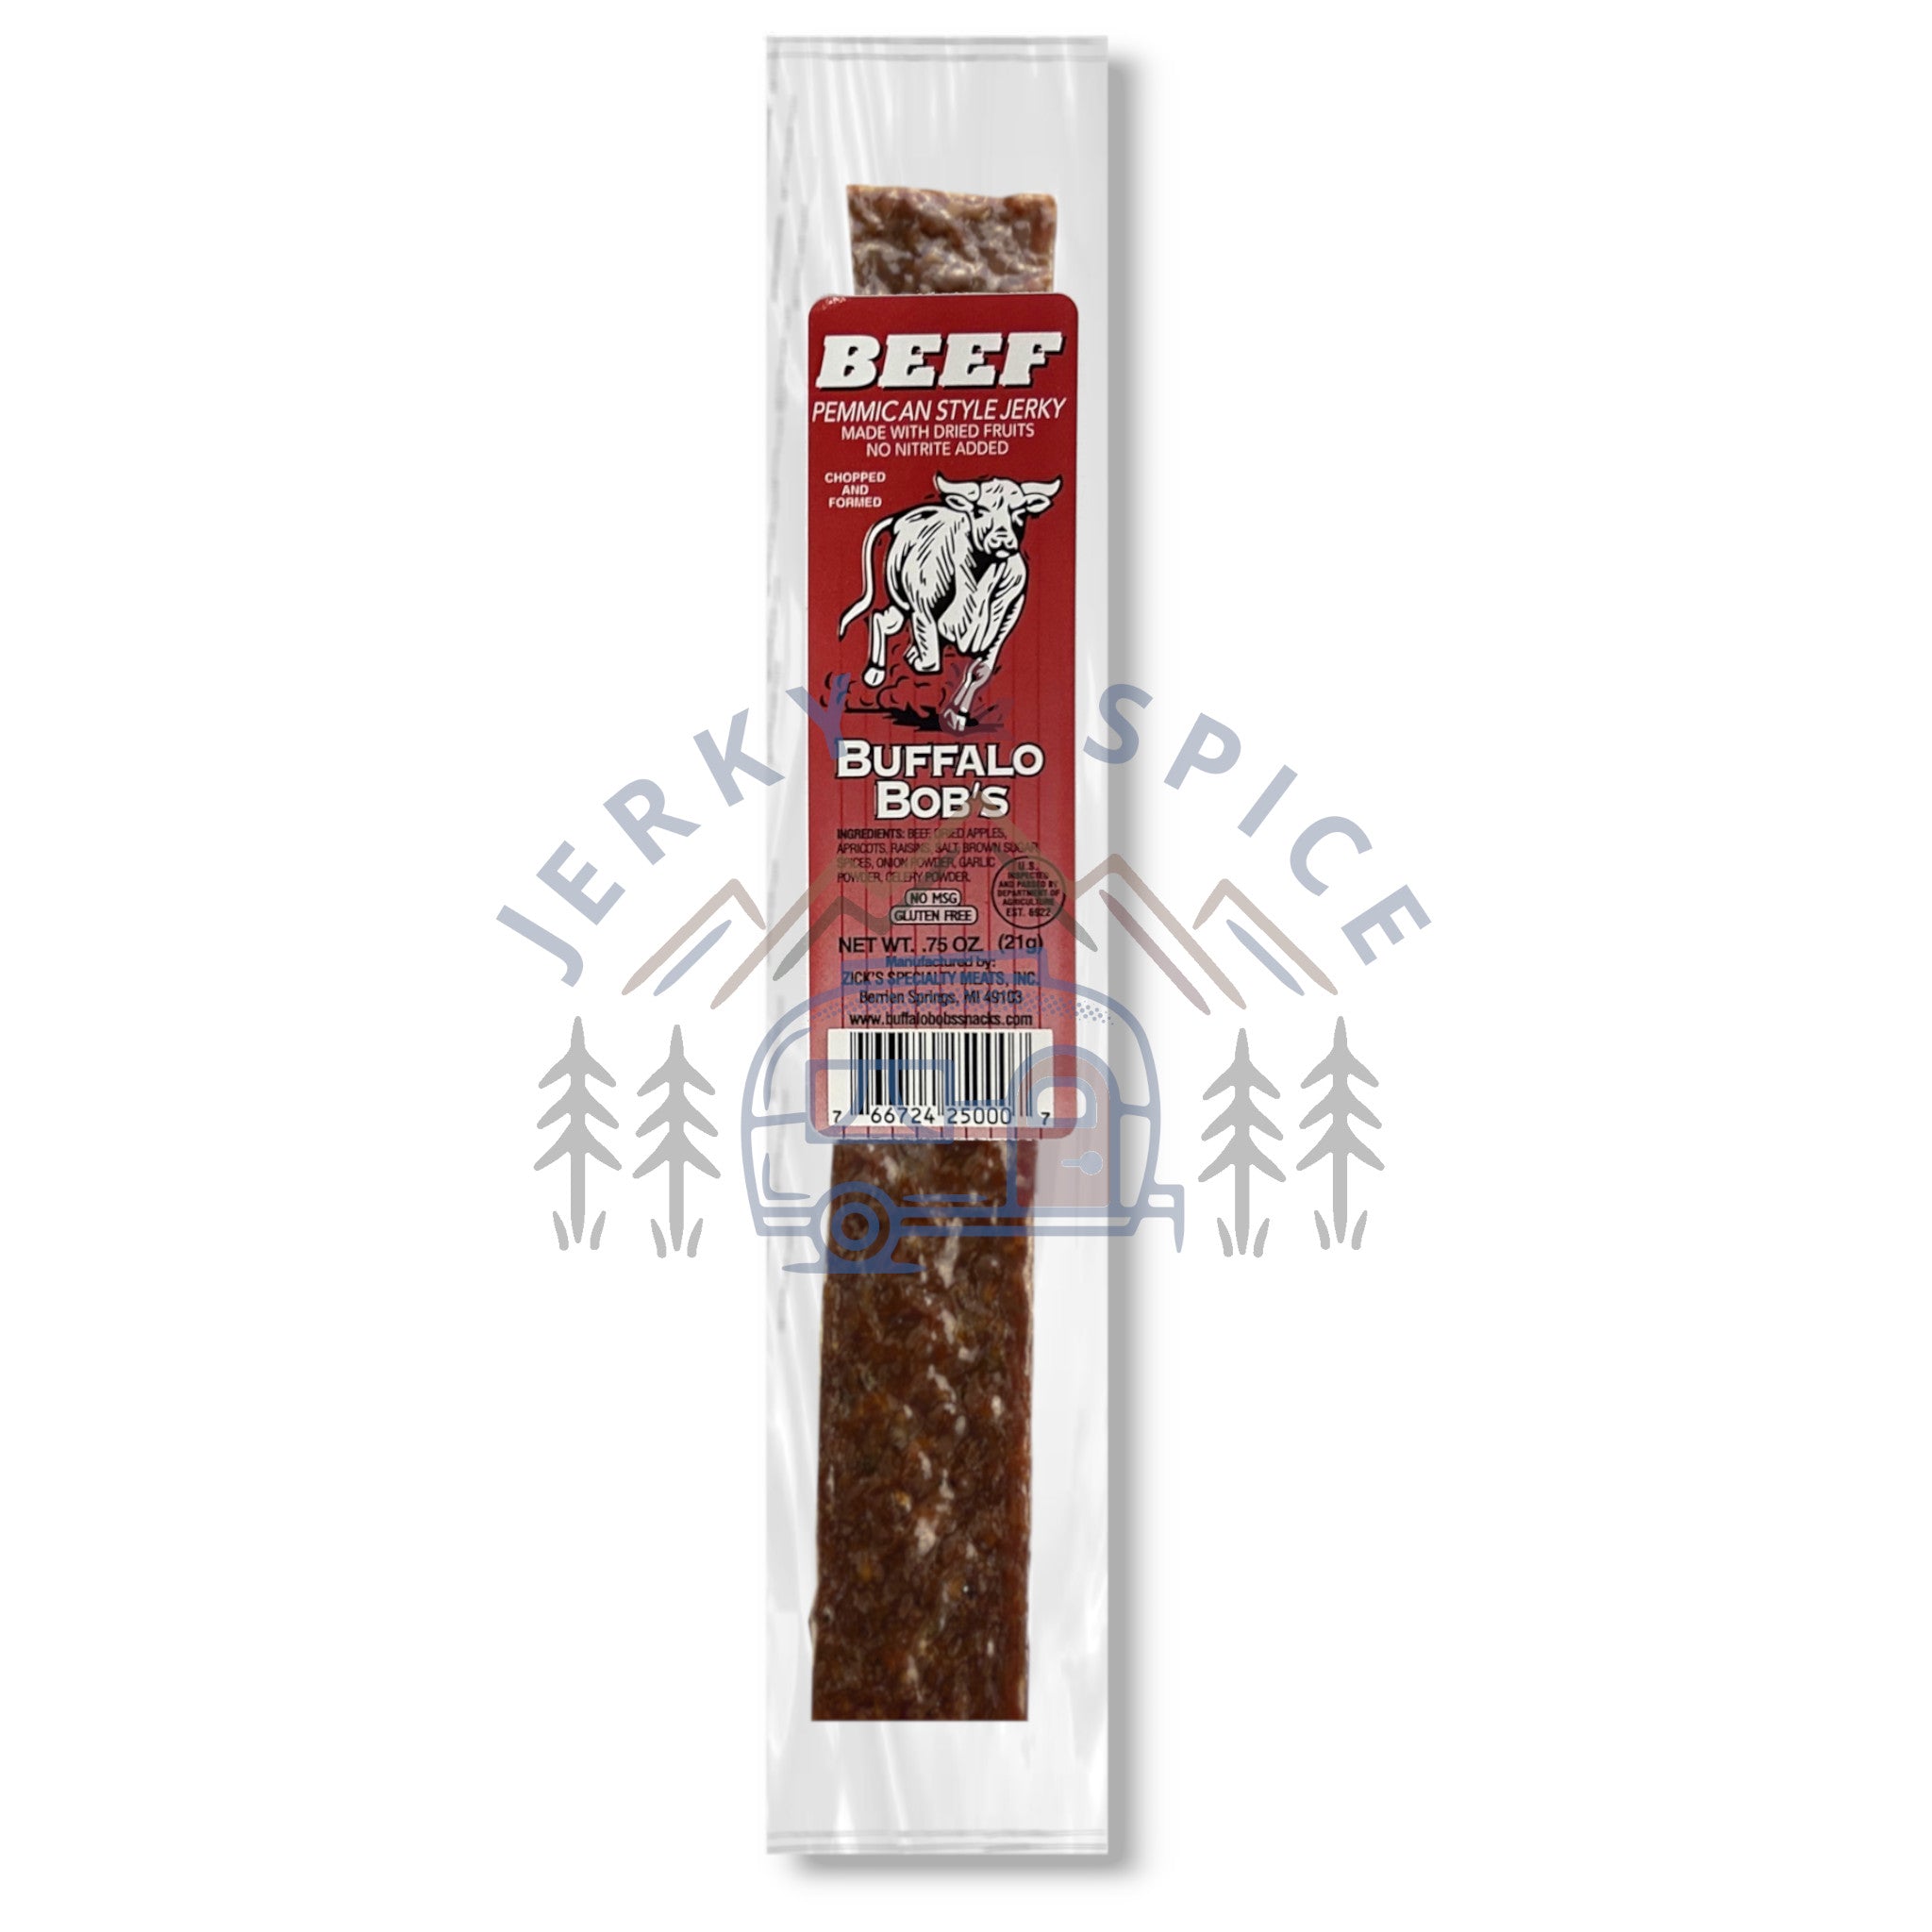 Beef Pemmican Chopped Jerky